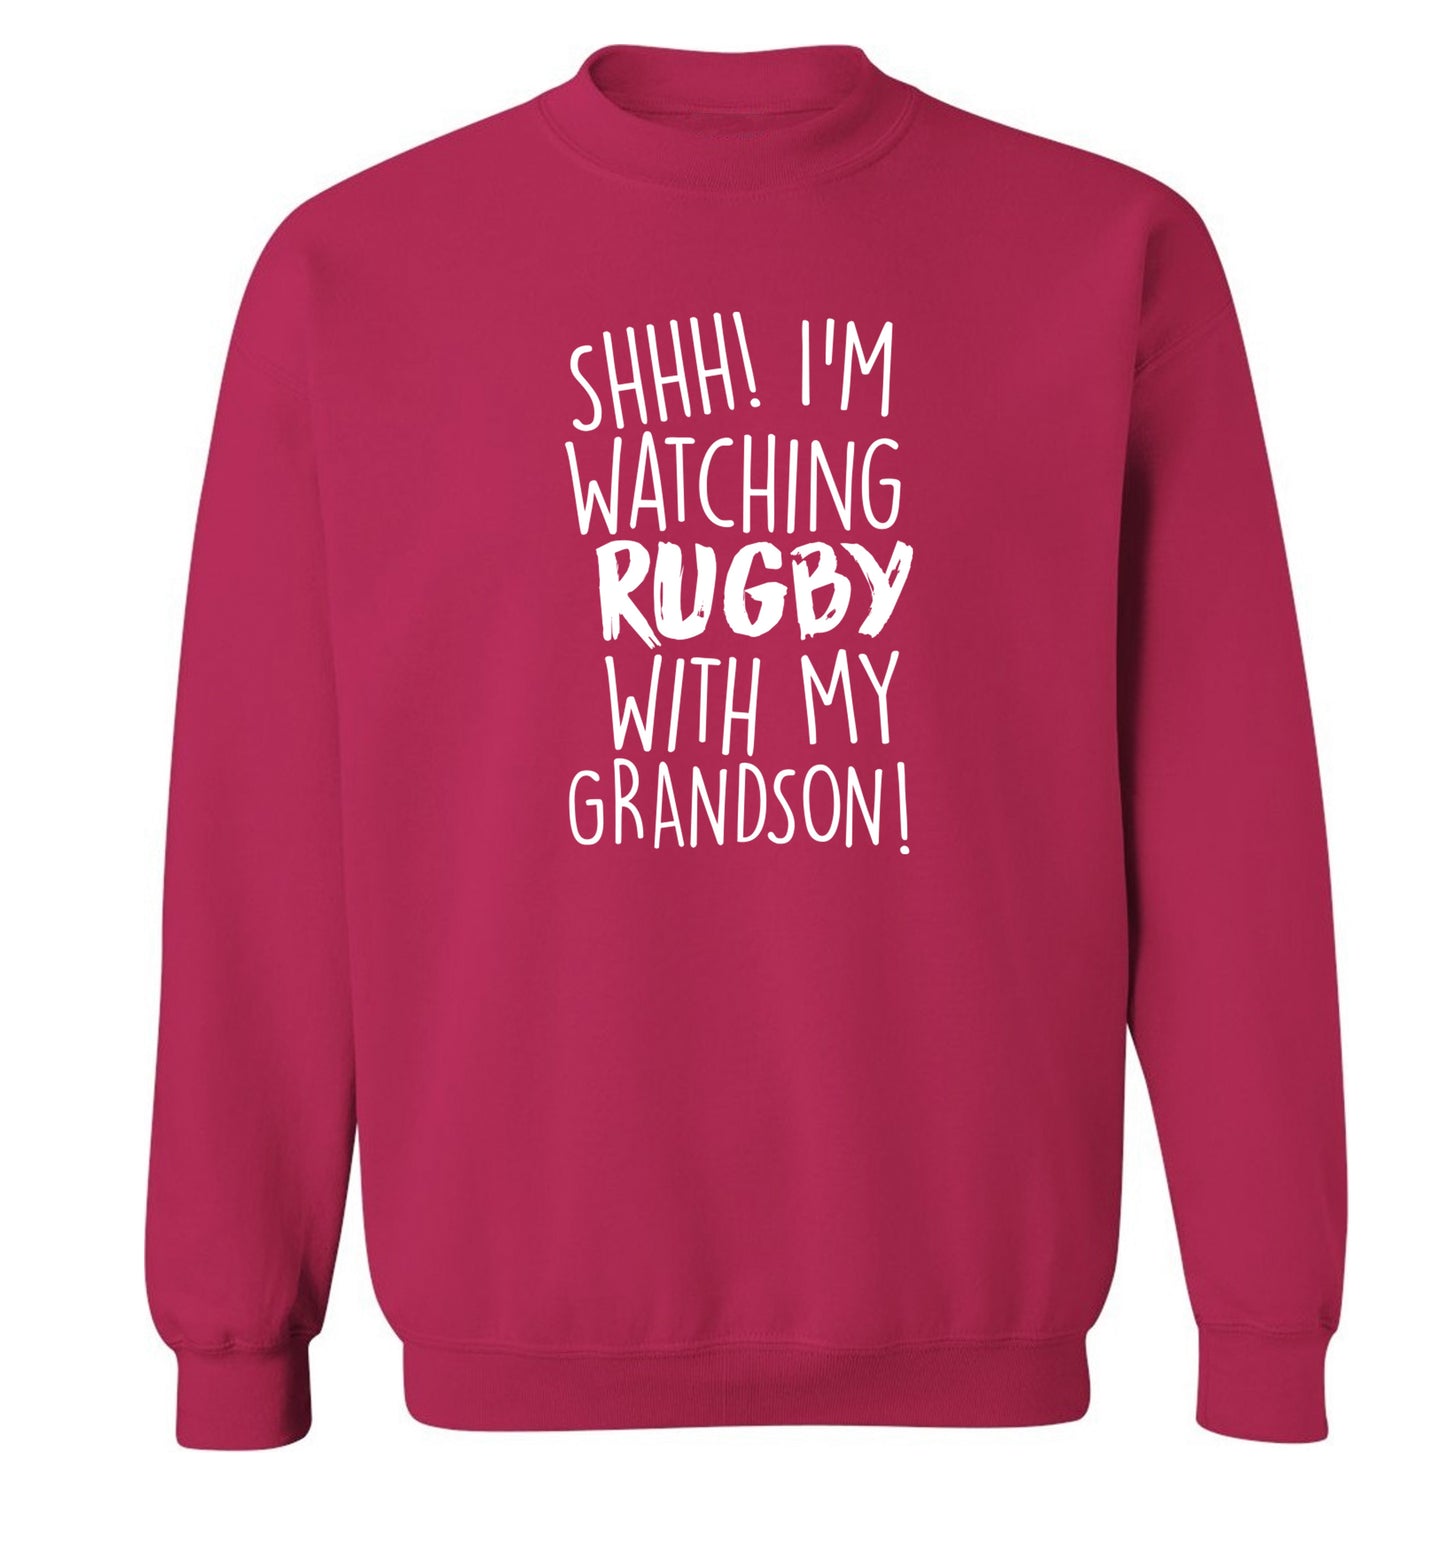 Shh I'm watching rugby with my grandson Adult's unisex pink Sweater 2XL